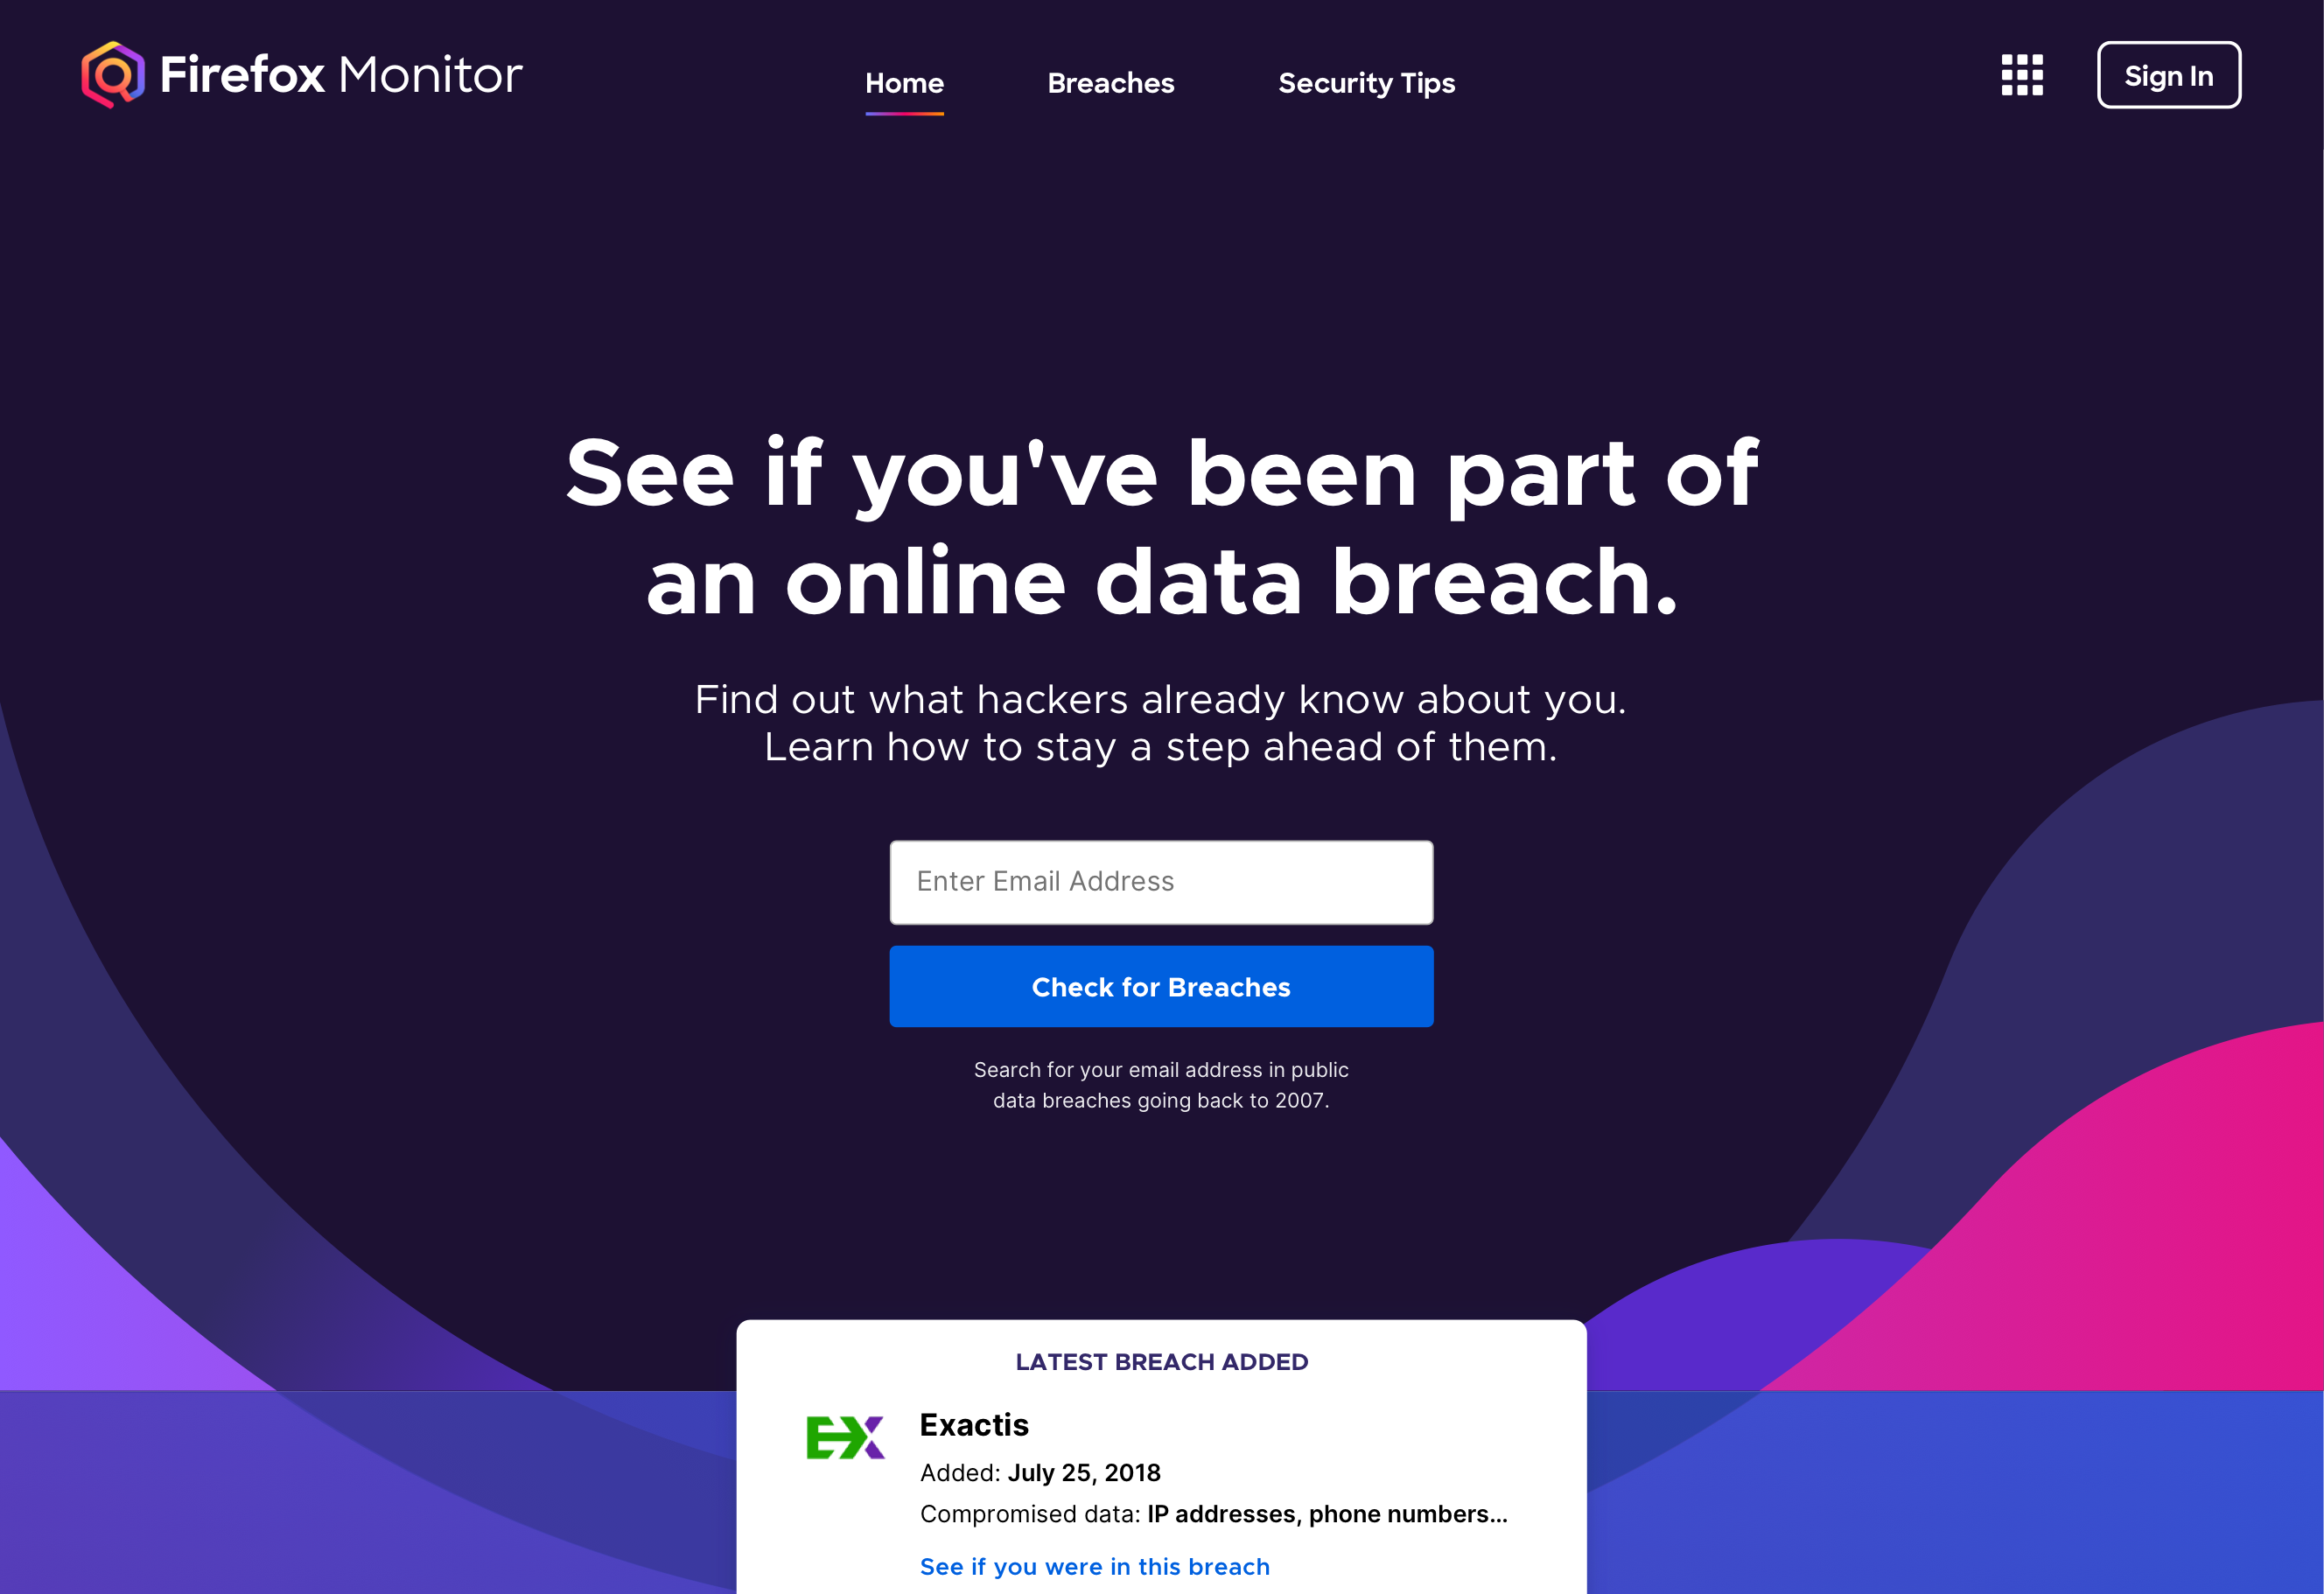 Screenshot of the desktop version of the Firefox Monitor website, which prompts users to enter their email address and check for breaches. 